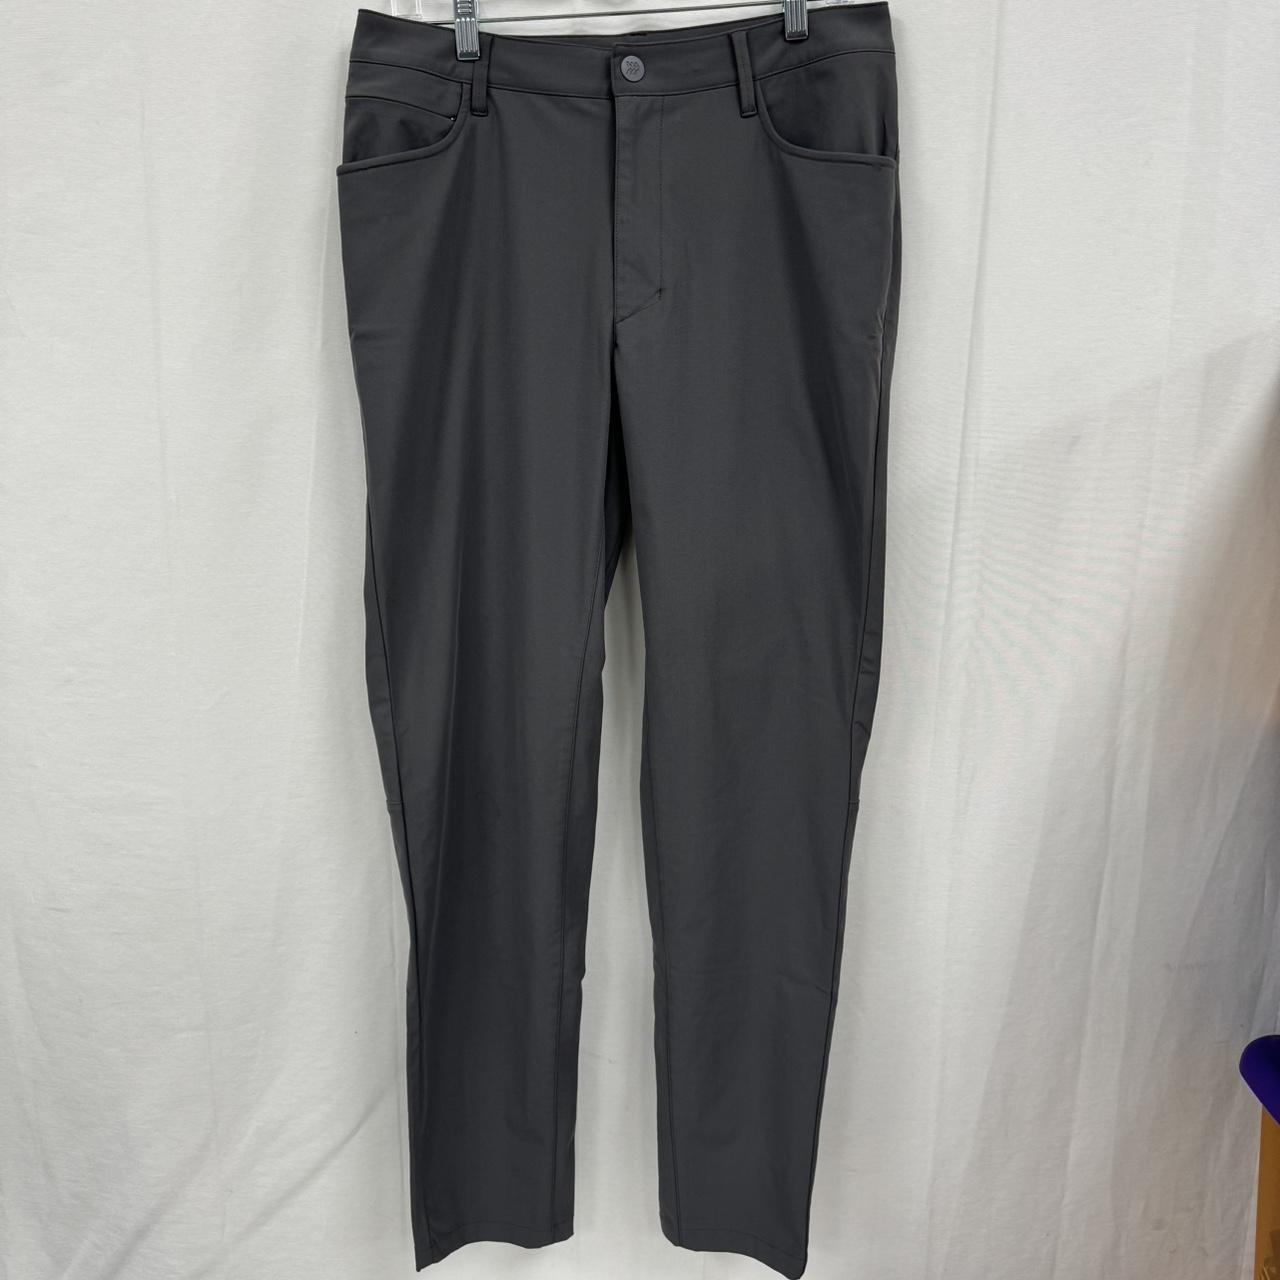 all in motion grey chino golf pants men's size 32W/32L - Depop